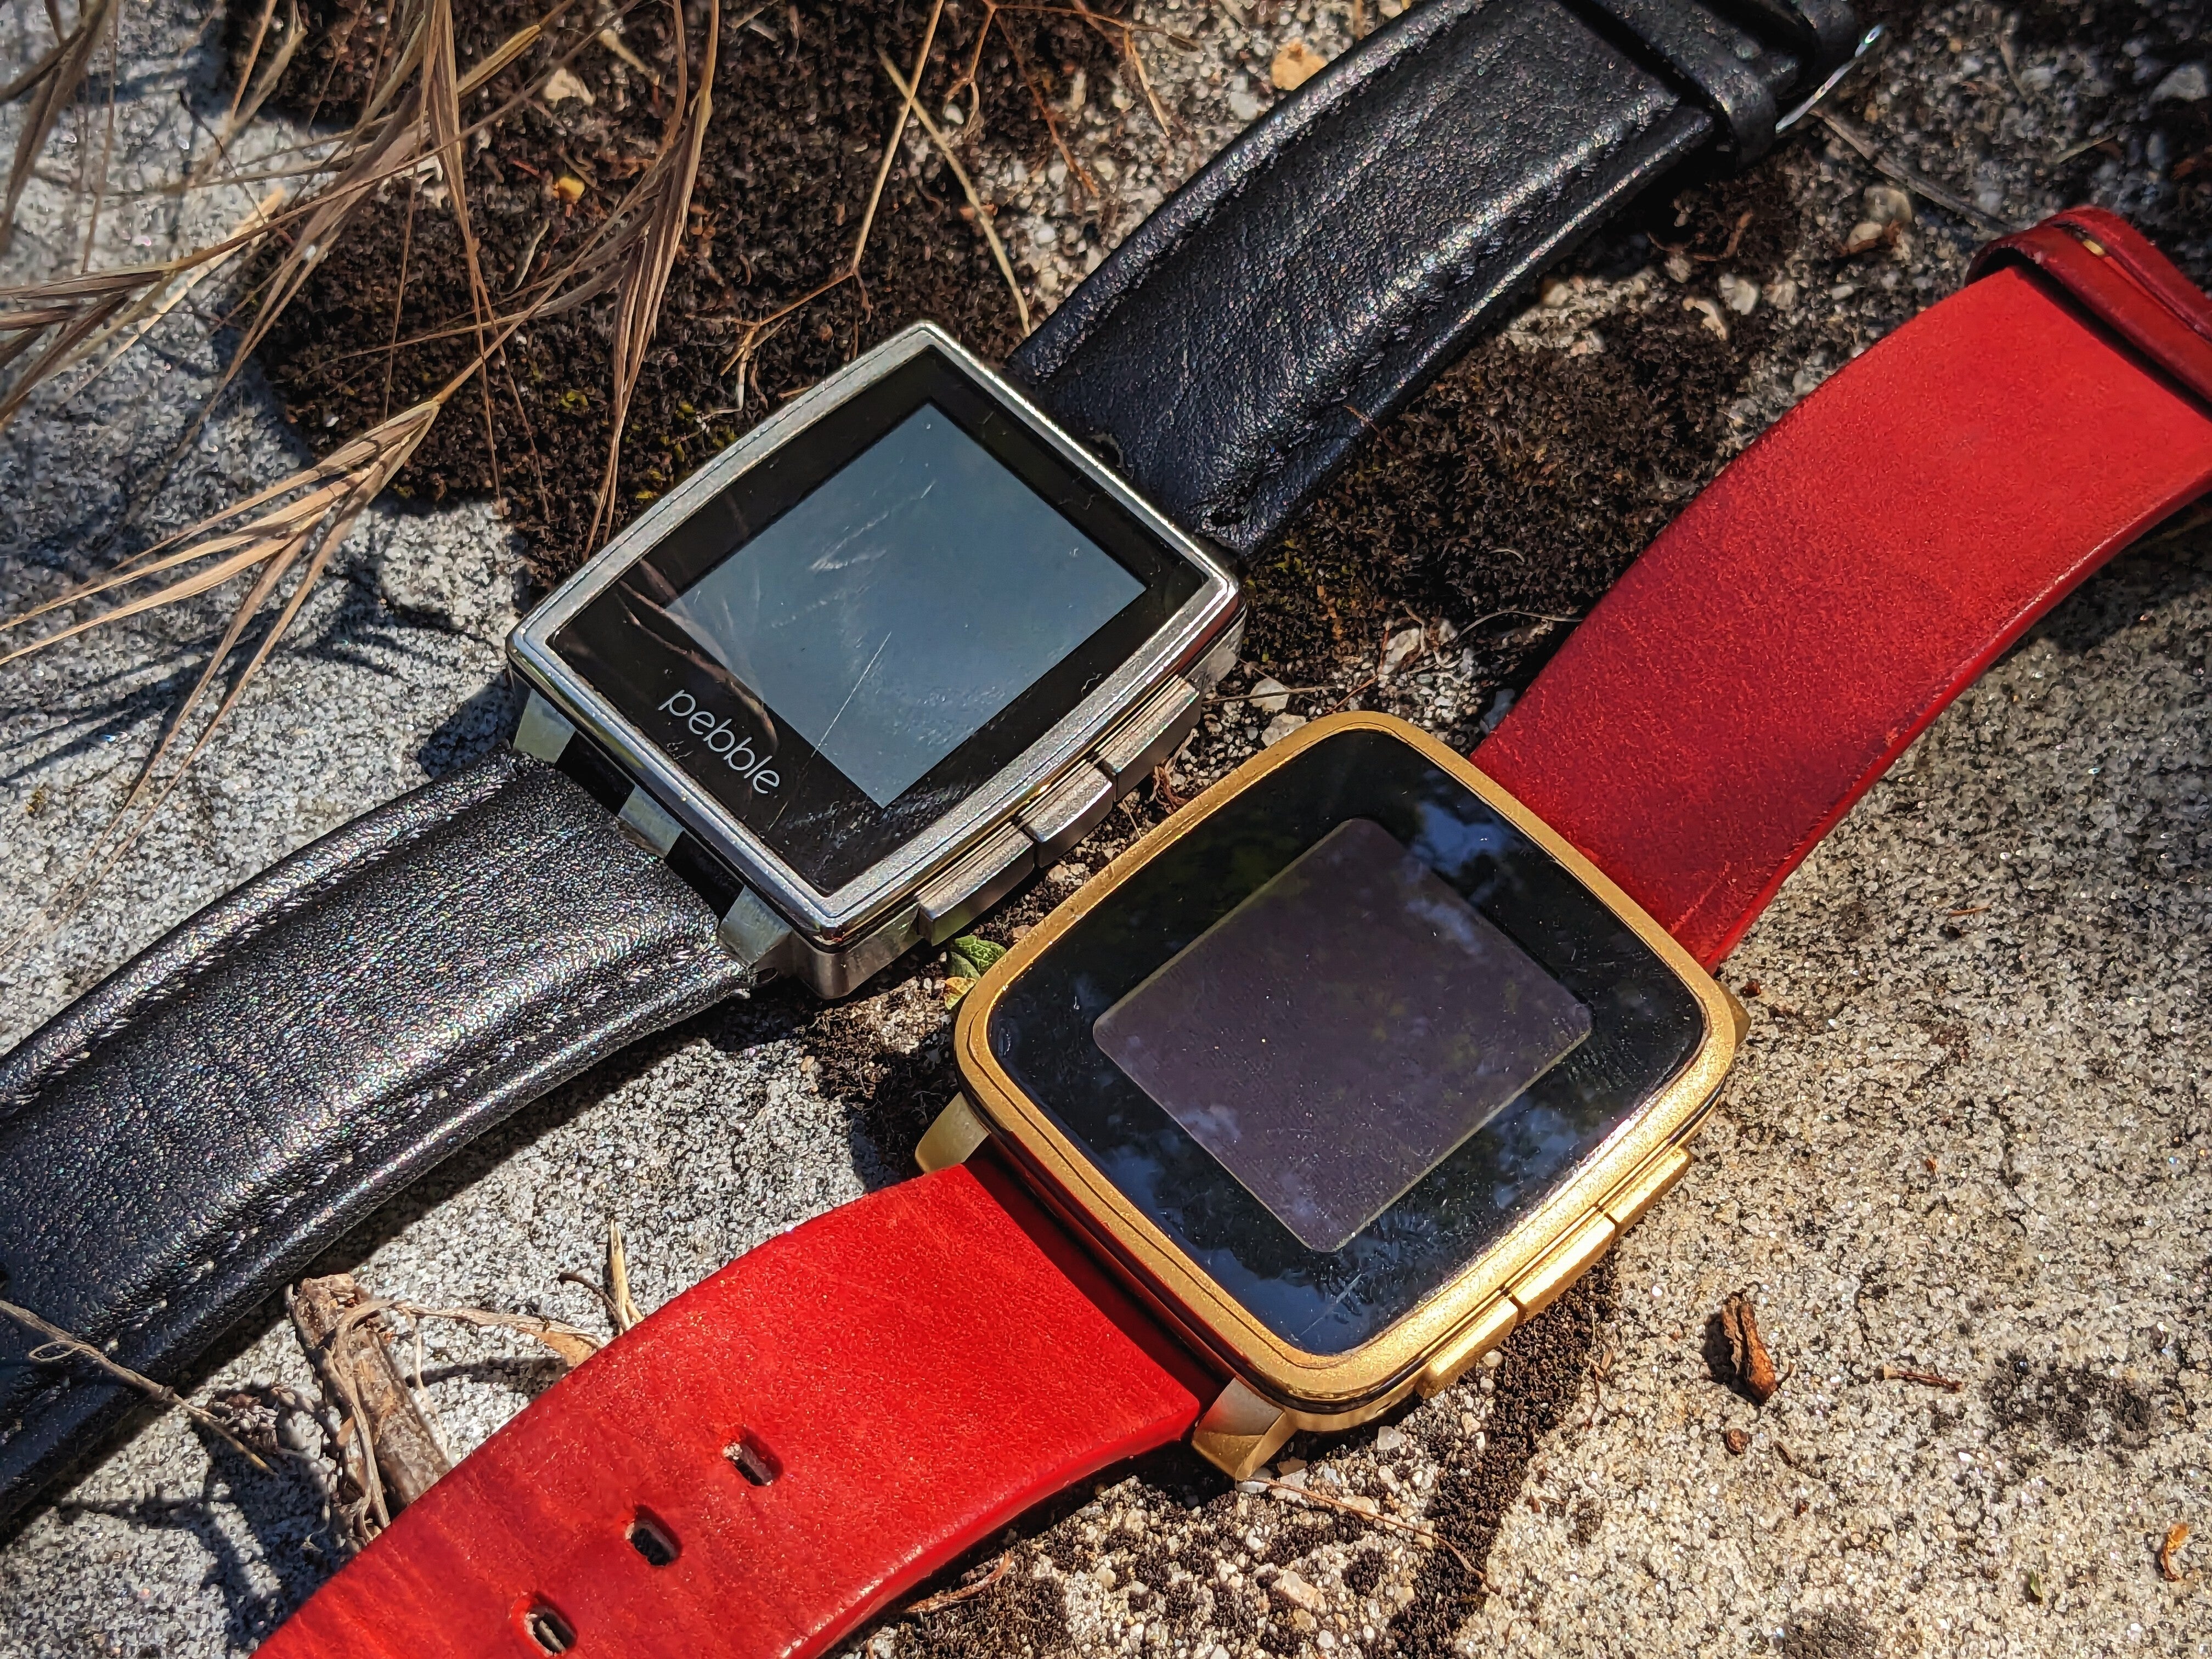 Want your Pebble smartwatch to work past June? Rebble is your friend - CNET